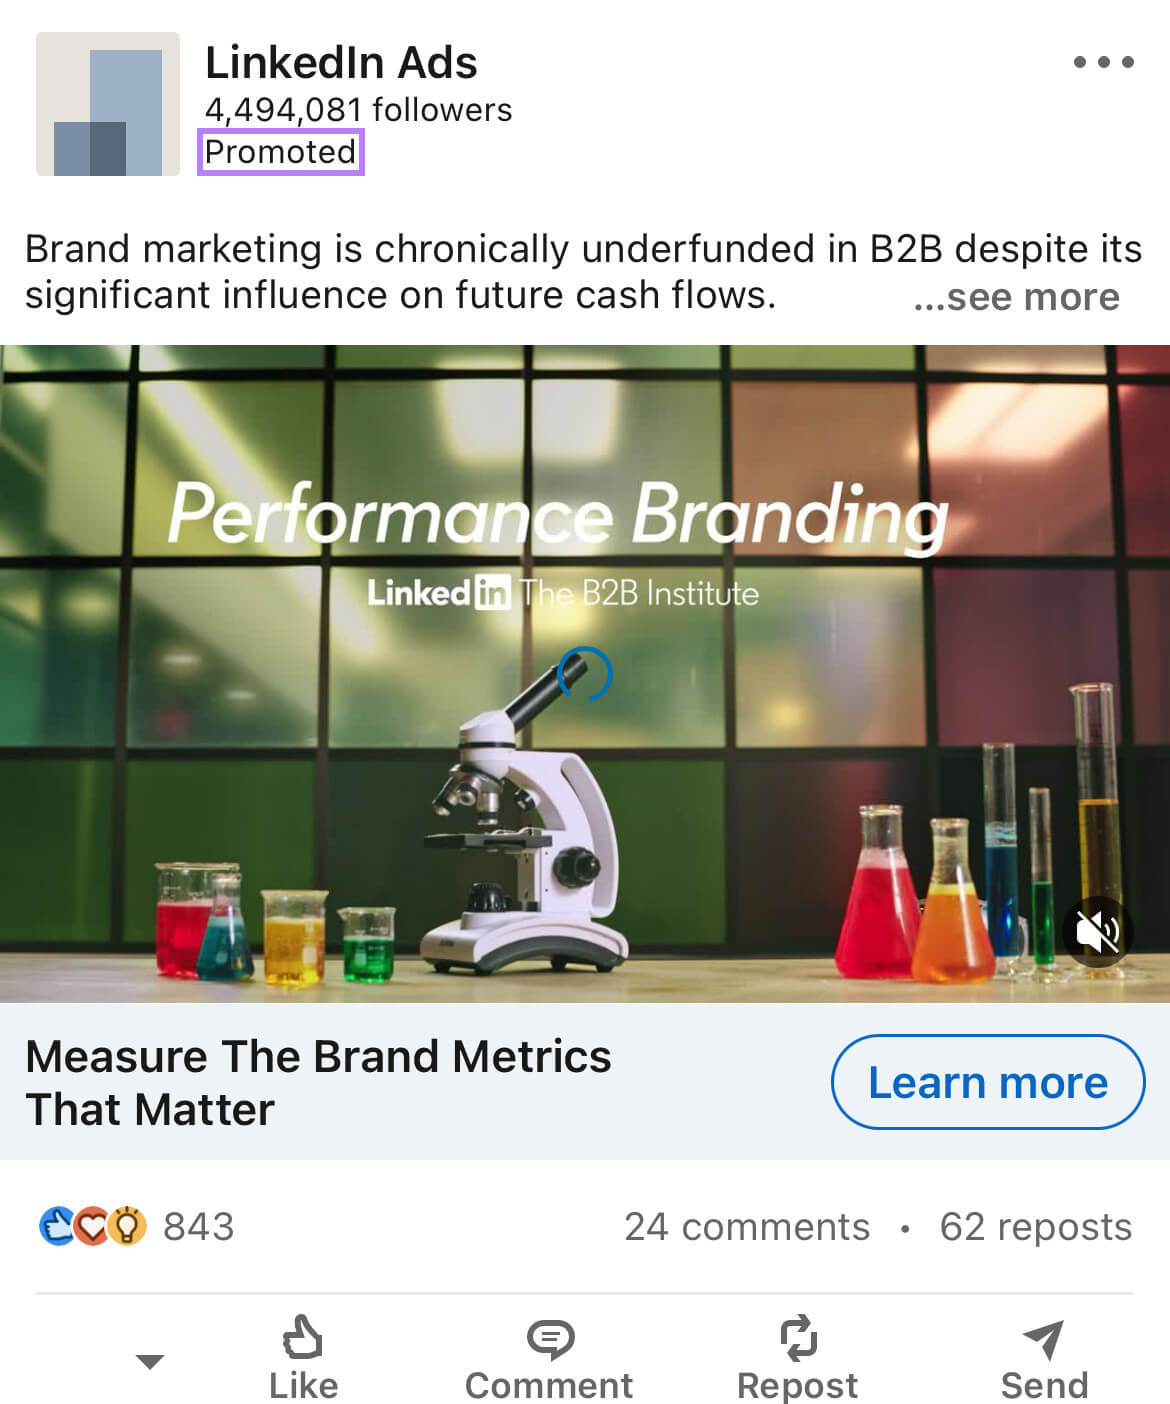 LinkedIn Ads sponsored contented  connected  measuring marque  metrics that matter